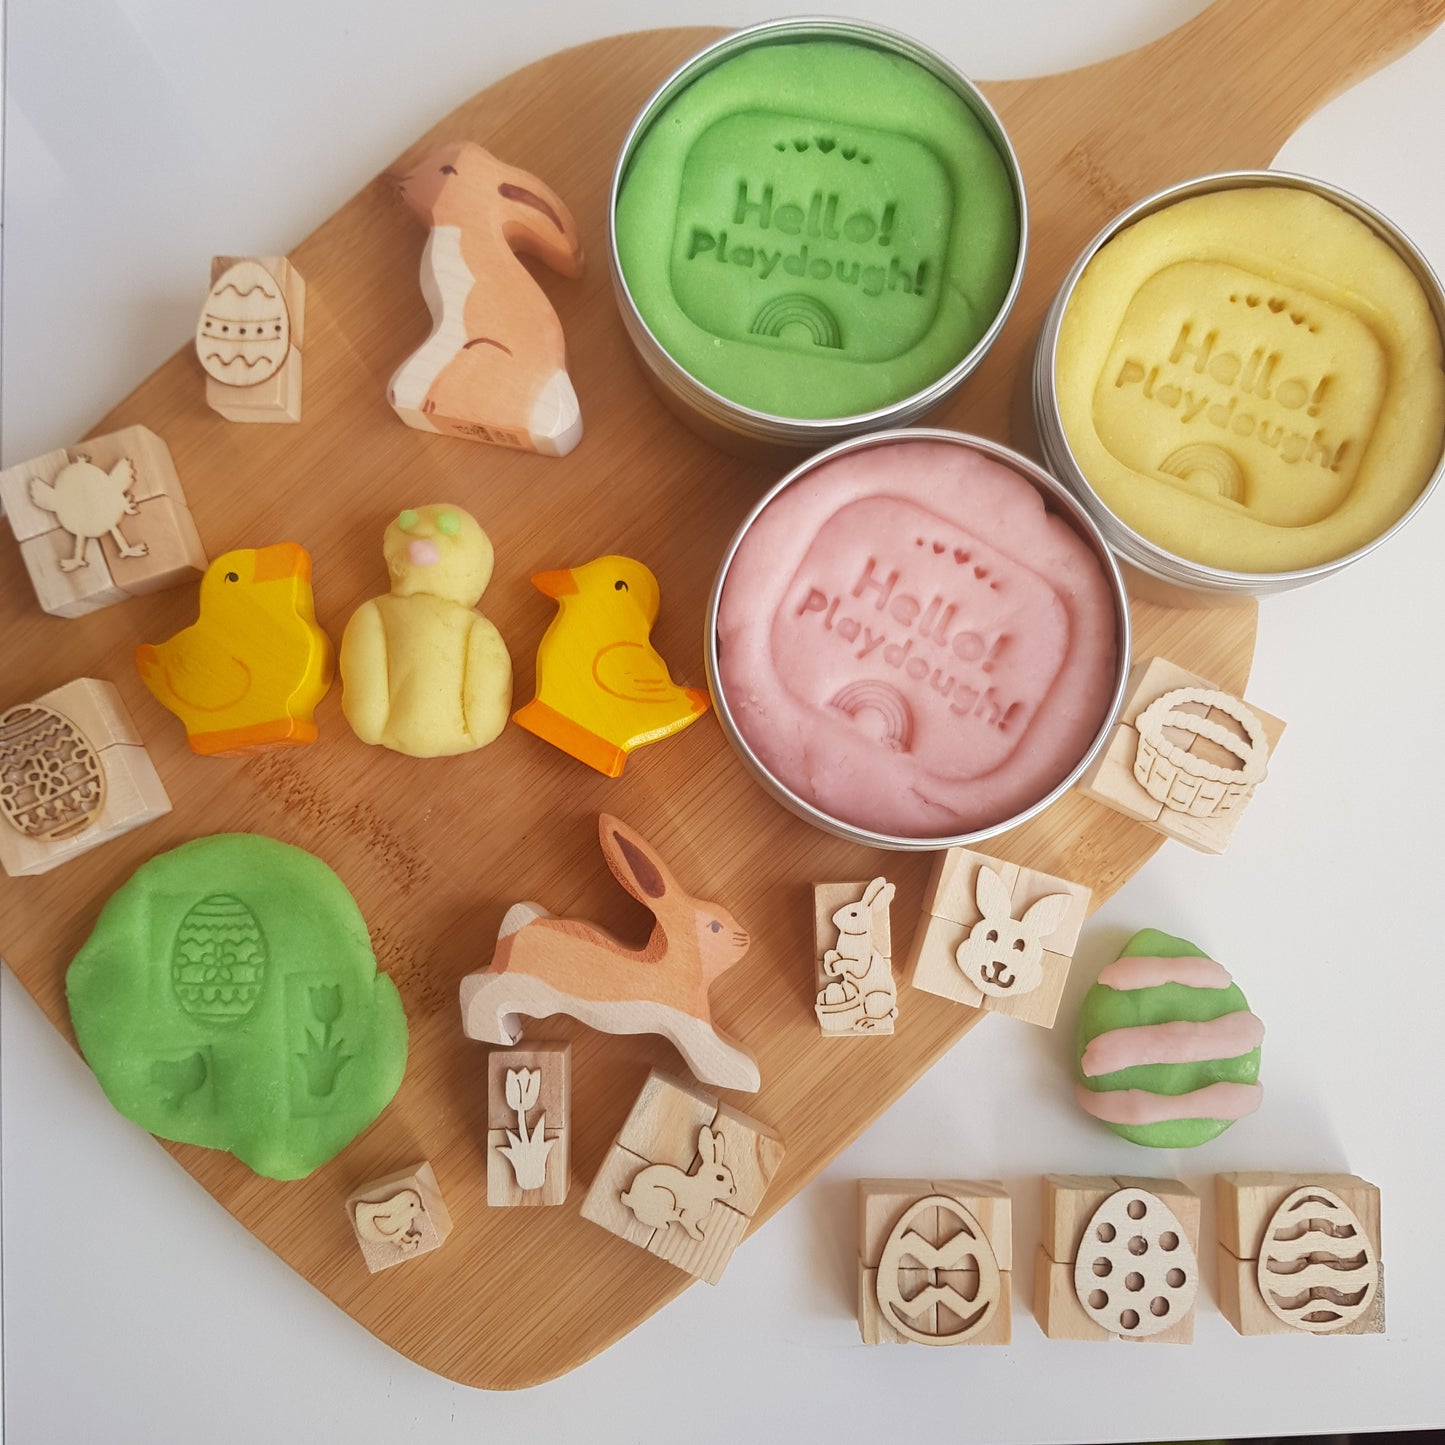 Hello! Playdough! Easter Set with Holztiger Toys